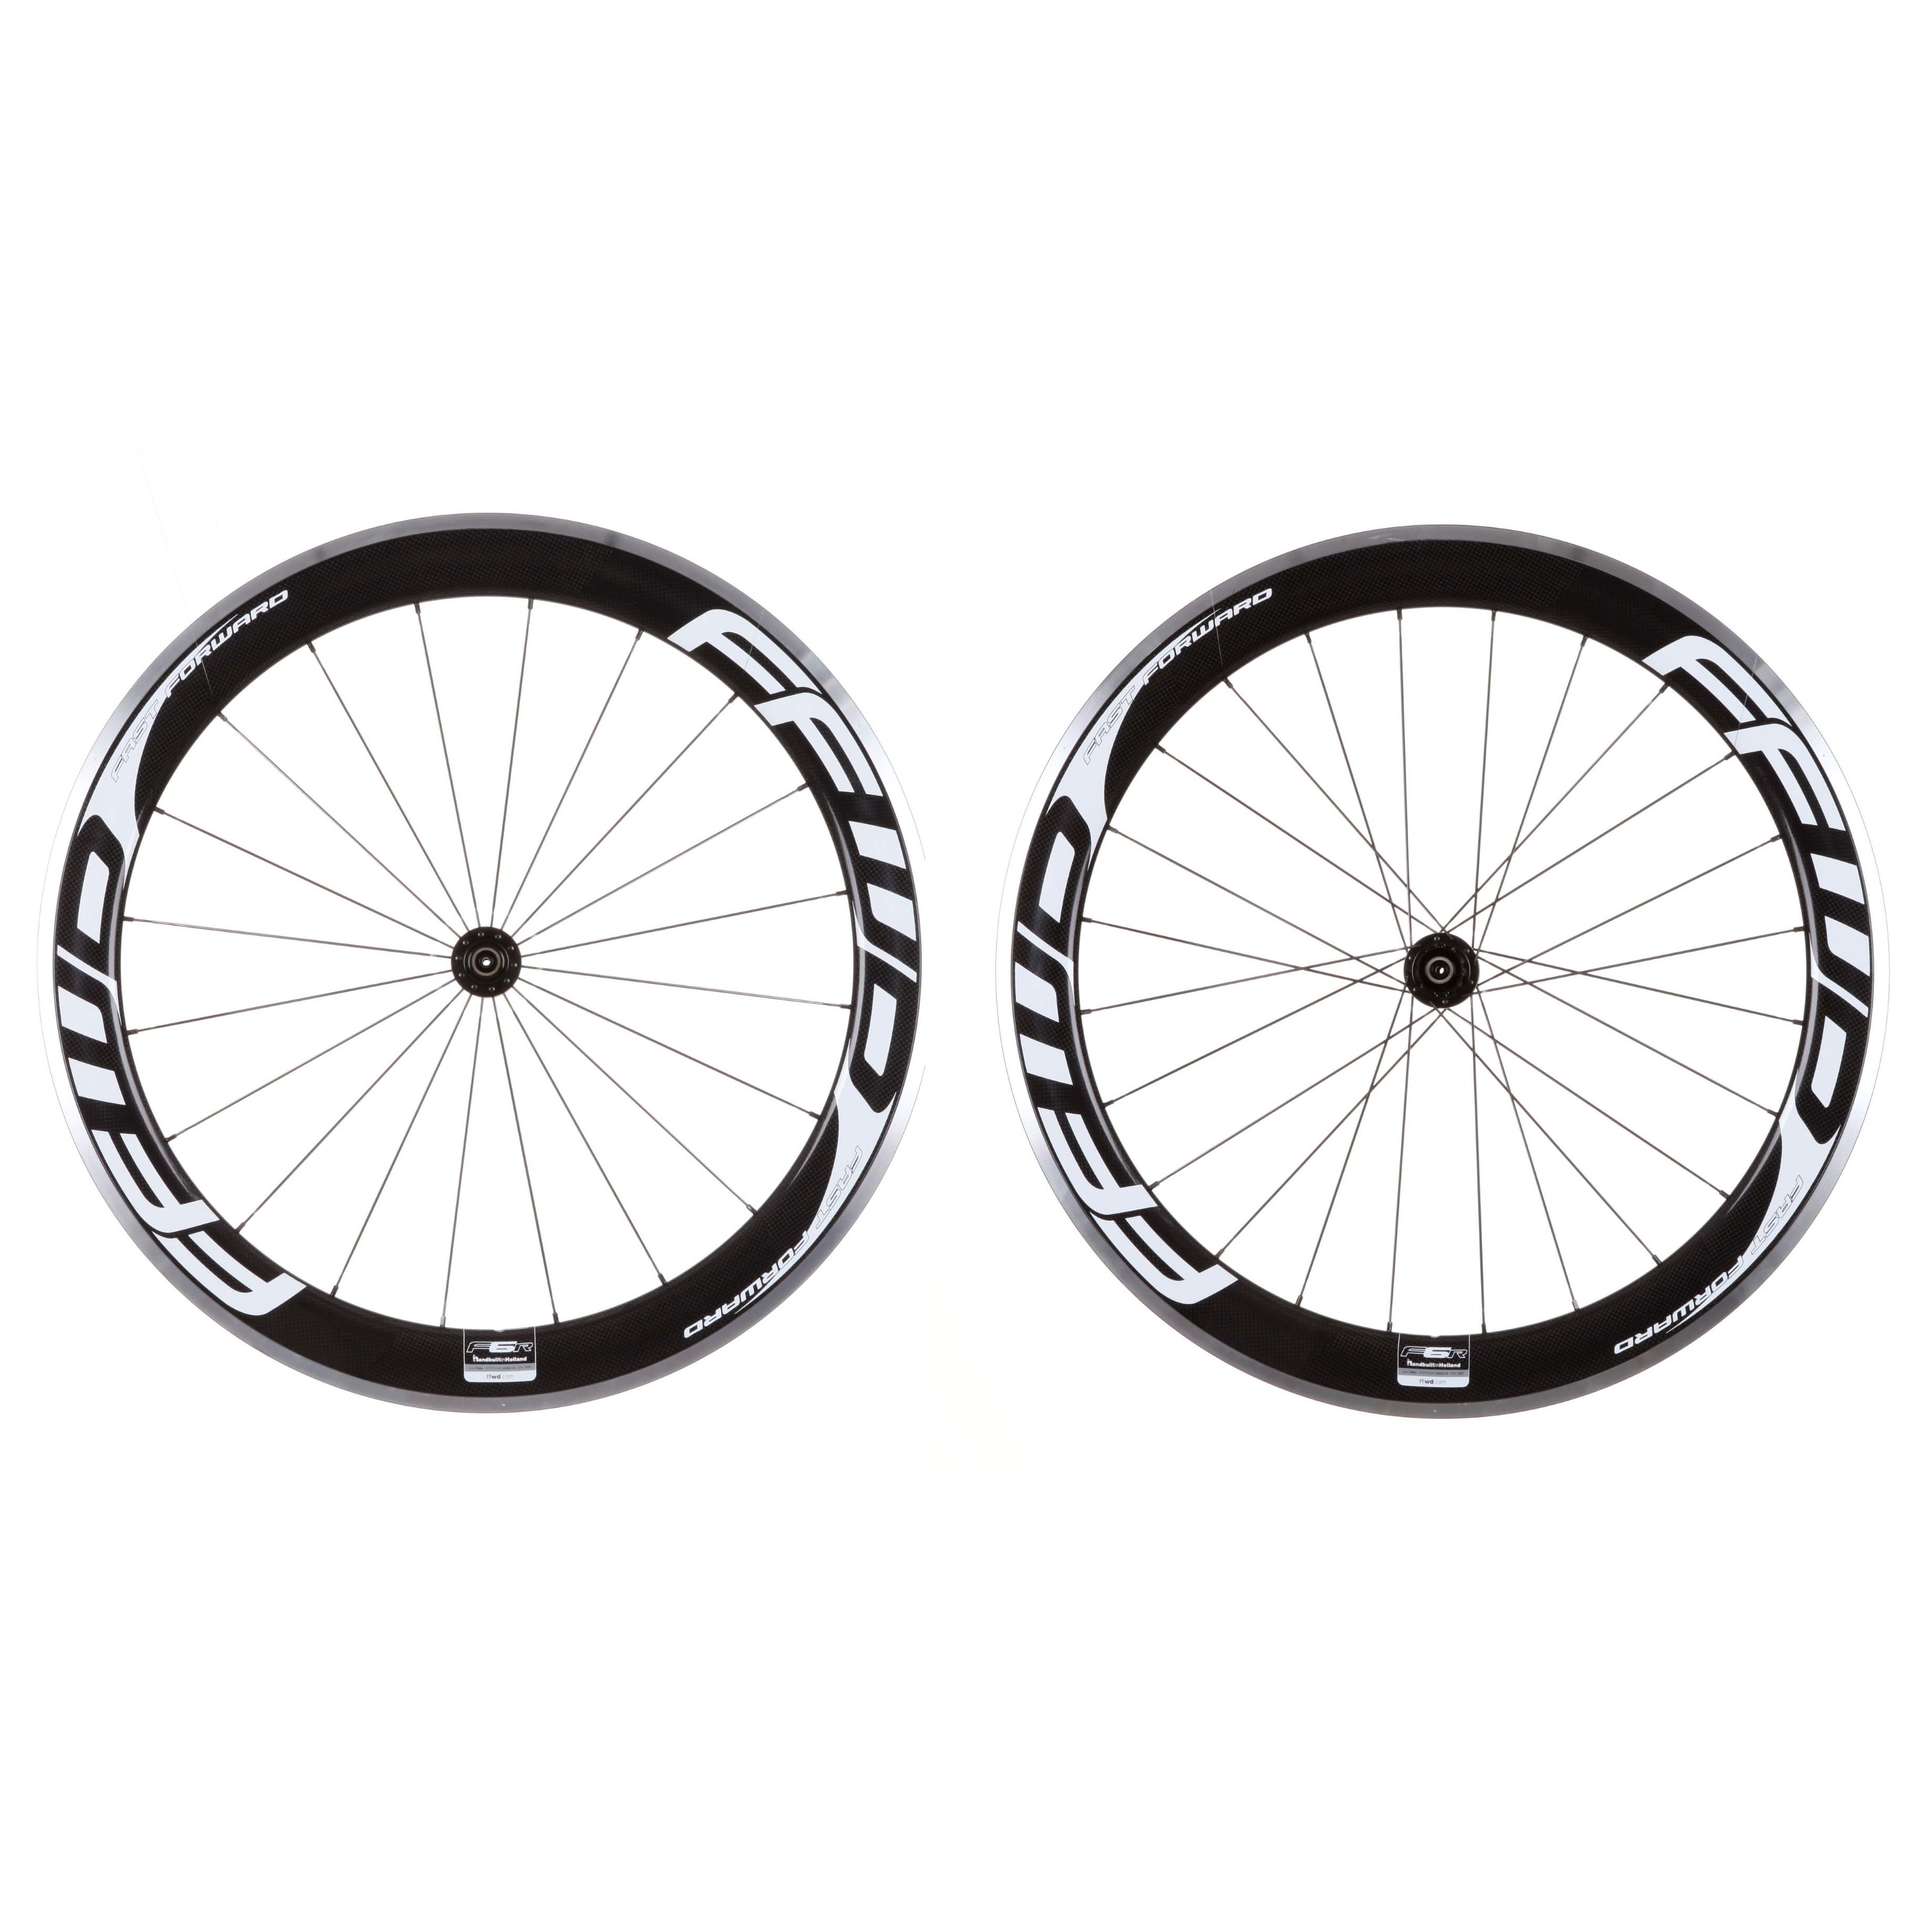 Fast Forward F6R Carbon Alloy Clincher Wielset met DT Swiss 240s Naaf Wit